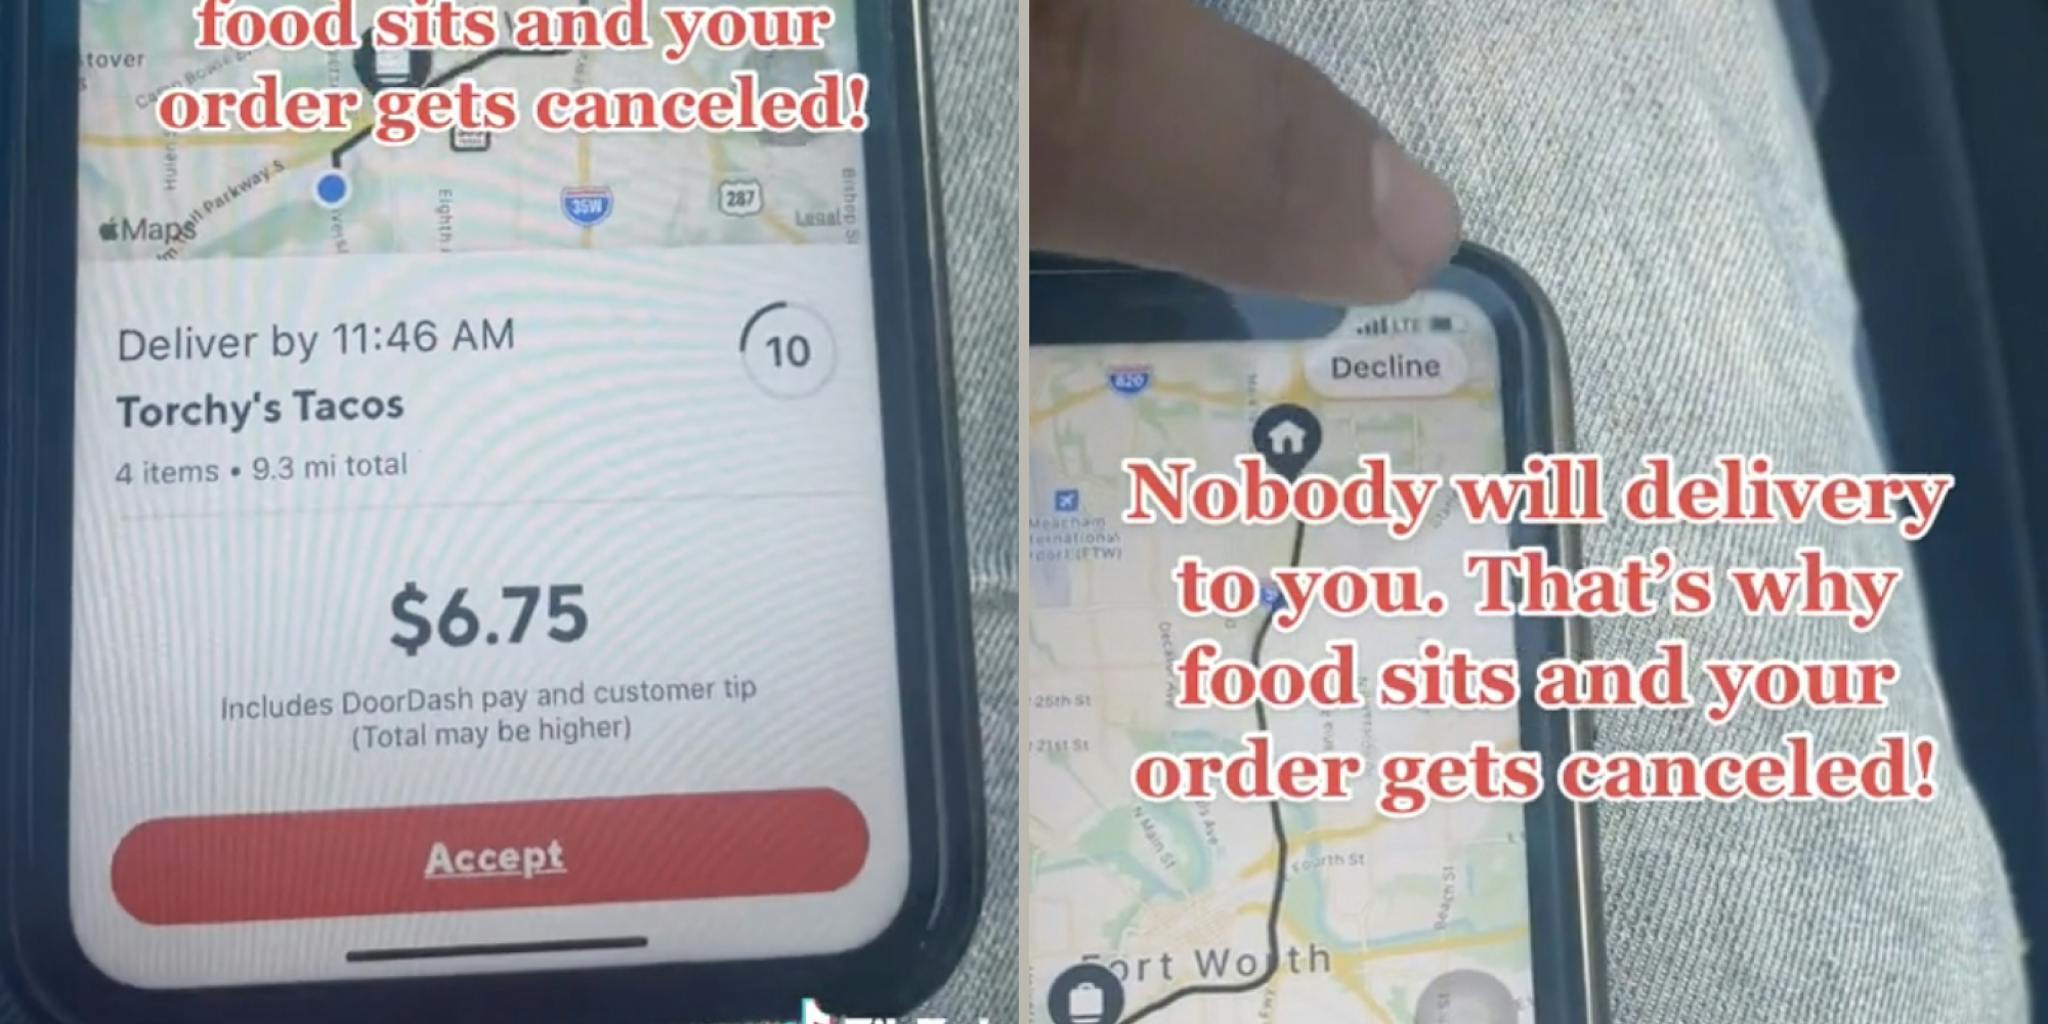 ‘That’s why food sits and your order gets canceled’: DoorDash driver declines low-paying order in viral TikTok, sparking debate